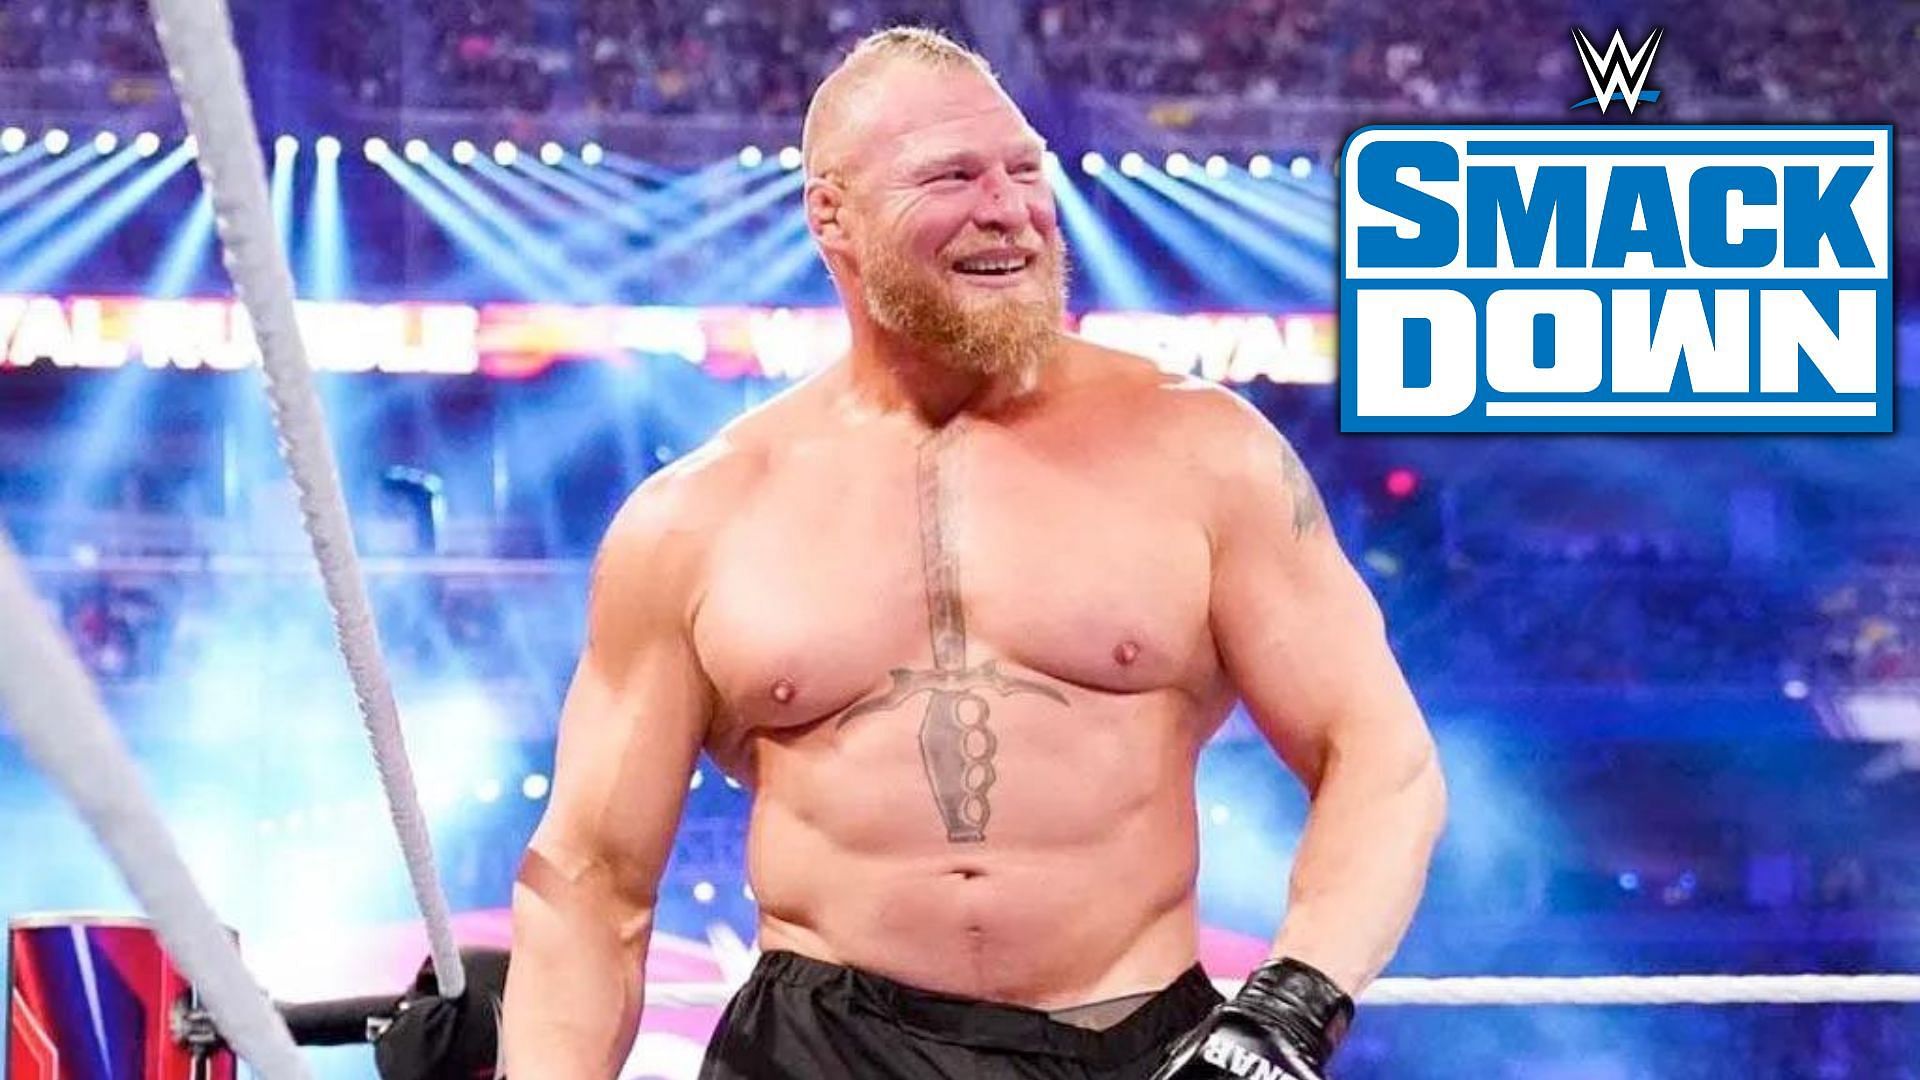 Brock Lesnar is one of the most recognizable names in pro-wrestling